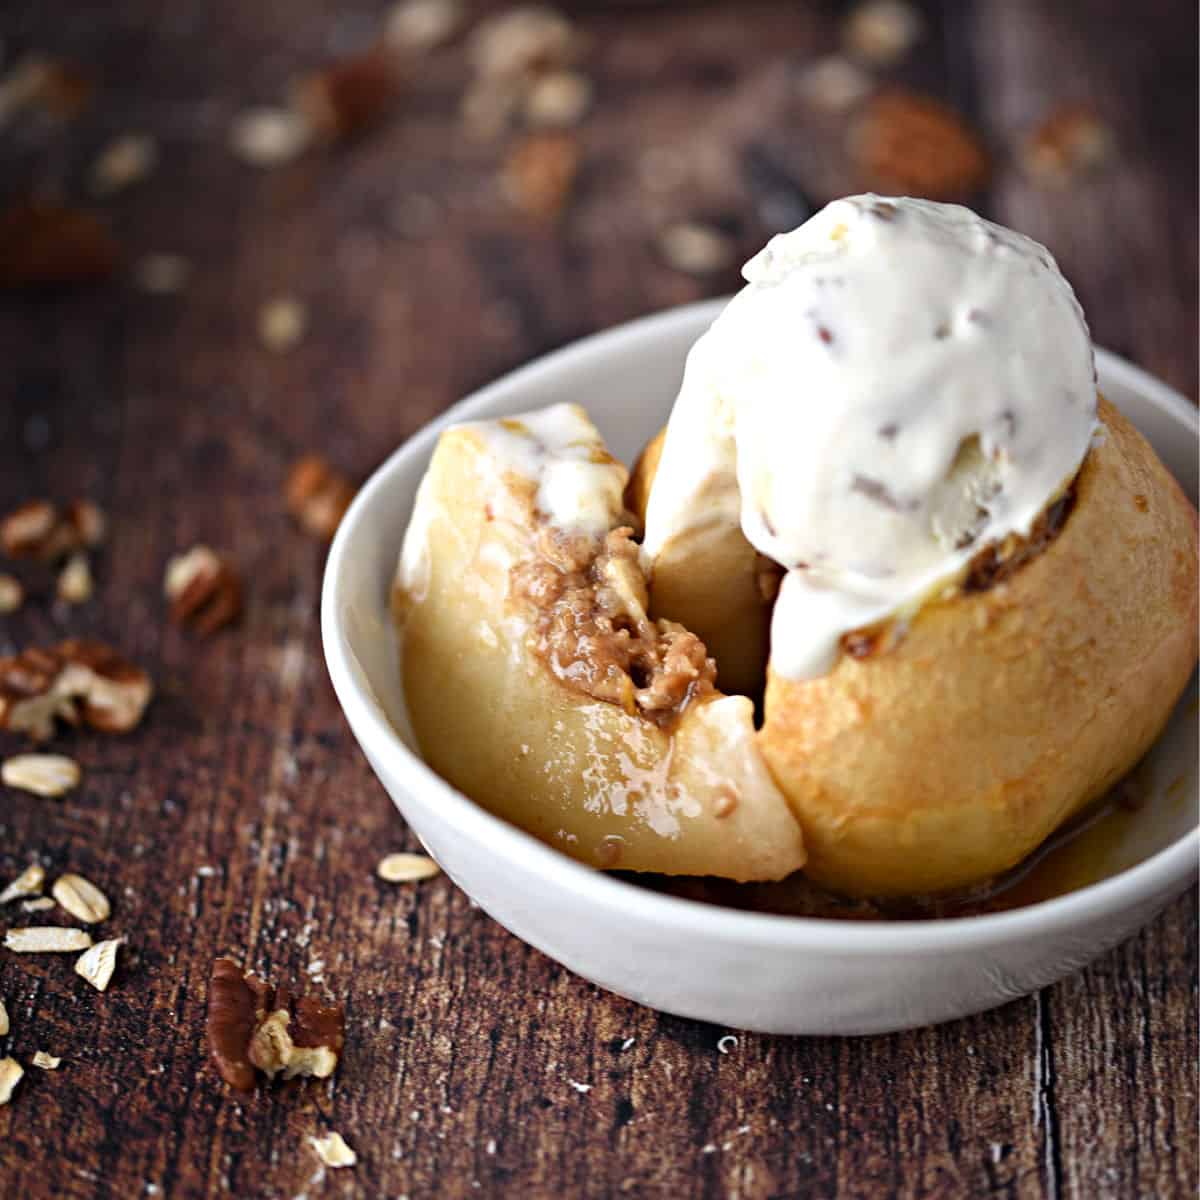 Spiced Rum Baked Apples